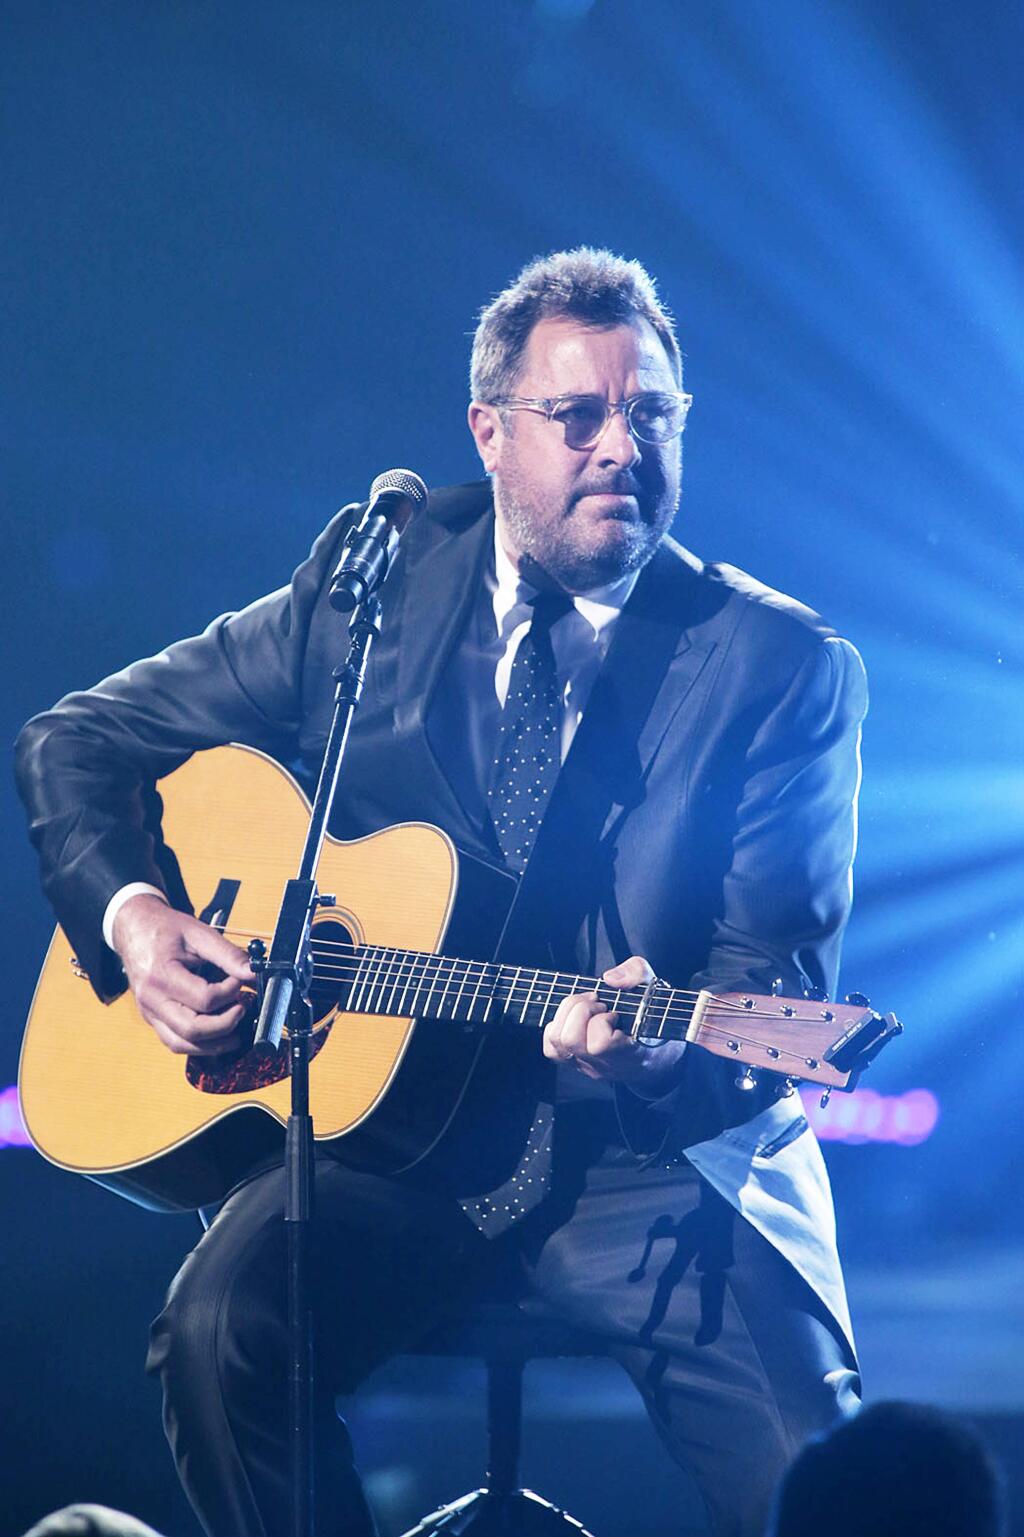 OKLAHOMA, OK - MAY 29: In this handout photo provided by NBC, Vince Gill performs during the Healing in the Heartland: Relief Benefit Concert held at the Chesapeake Arena on May 29, 2013 in Oklahoma City, Oklahoma. (Photo by Brett Deering/NBC via Getty Images) *** Local Caption *** Vince Gill